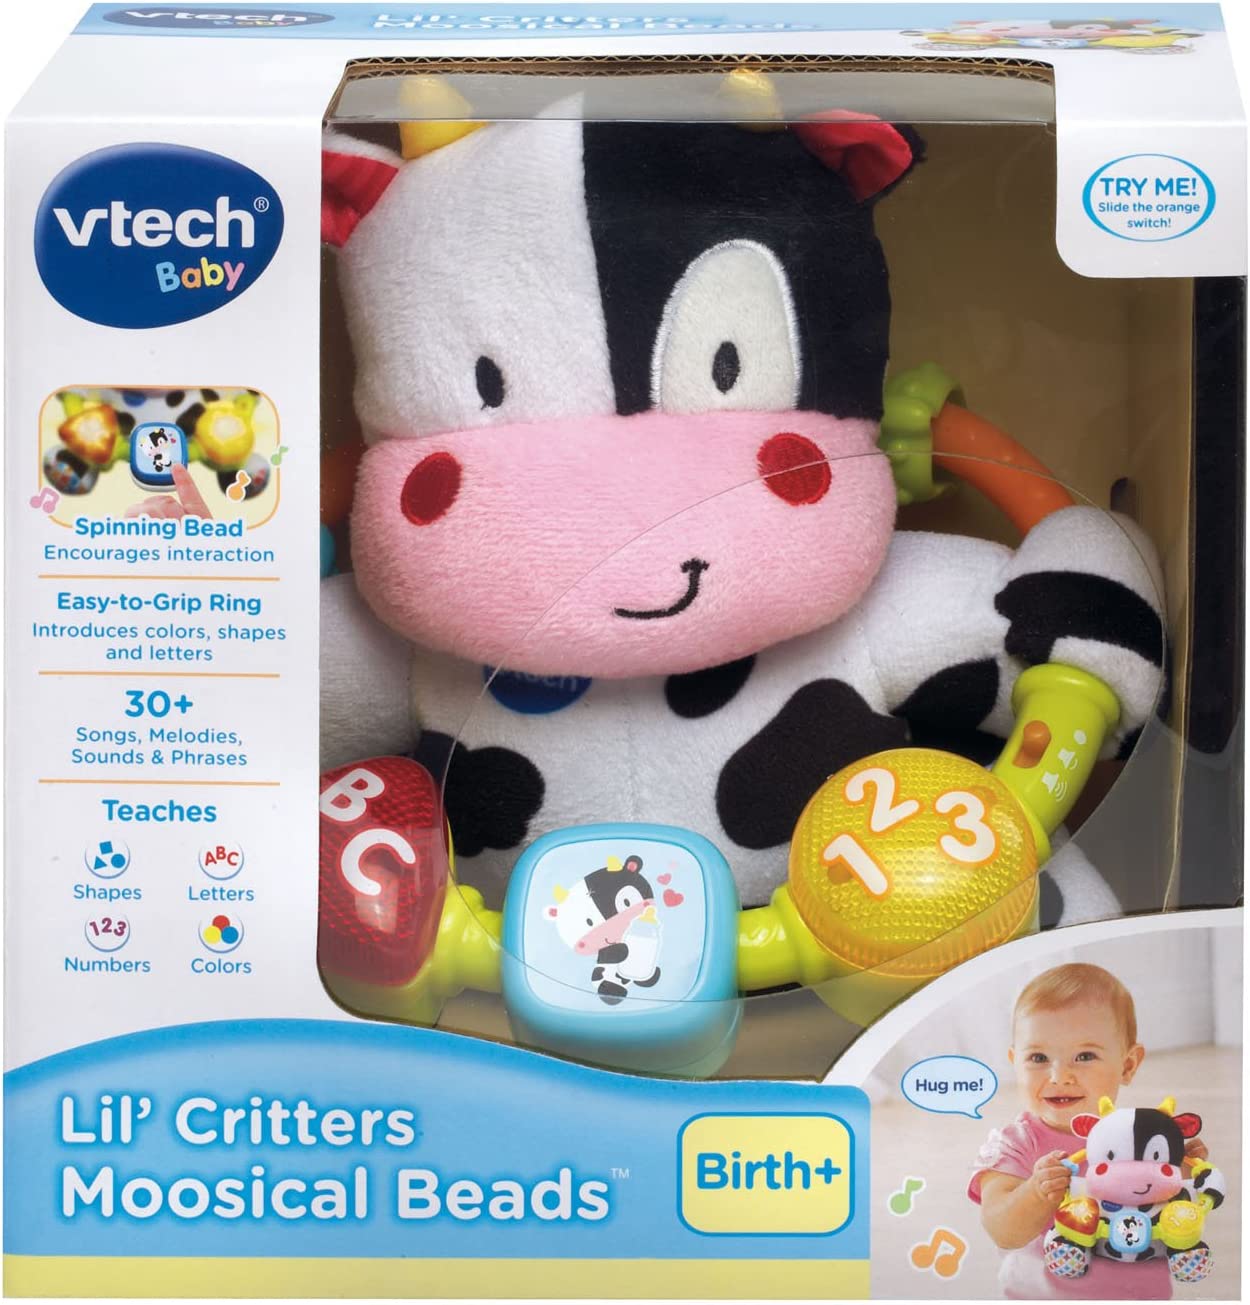 VTech Lil' Critters Moosical Beads, Black - for Ages 0-24 Months